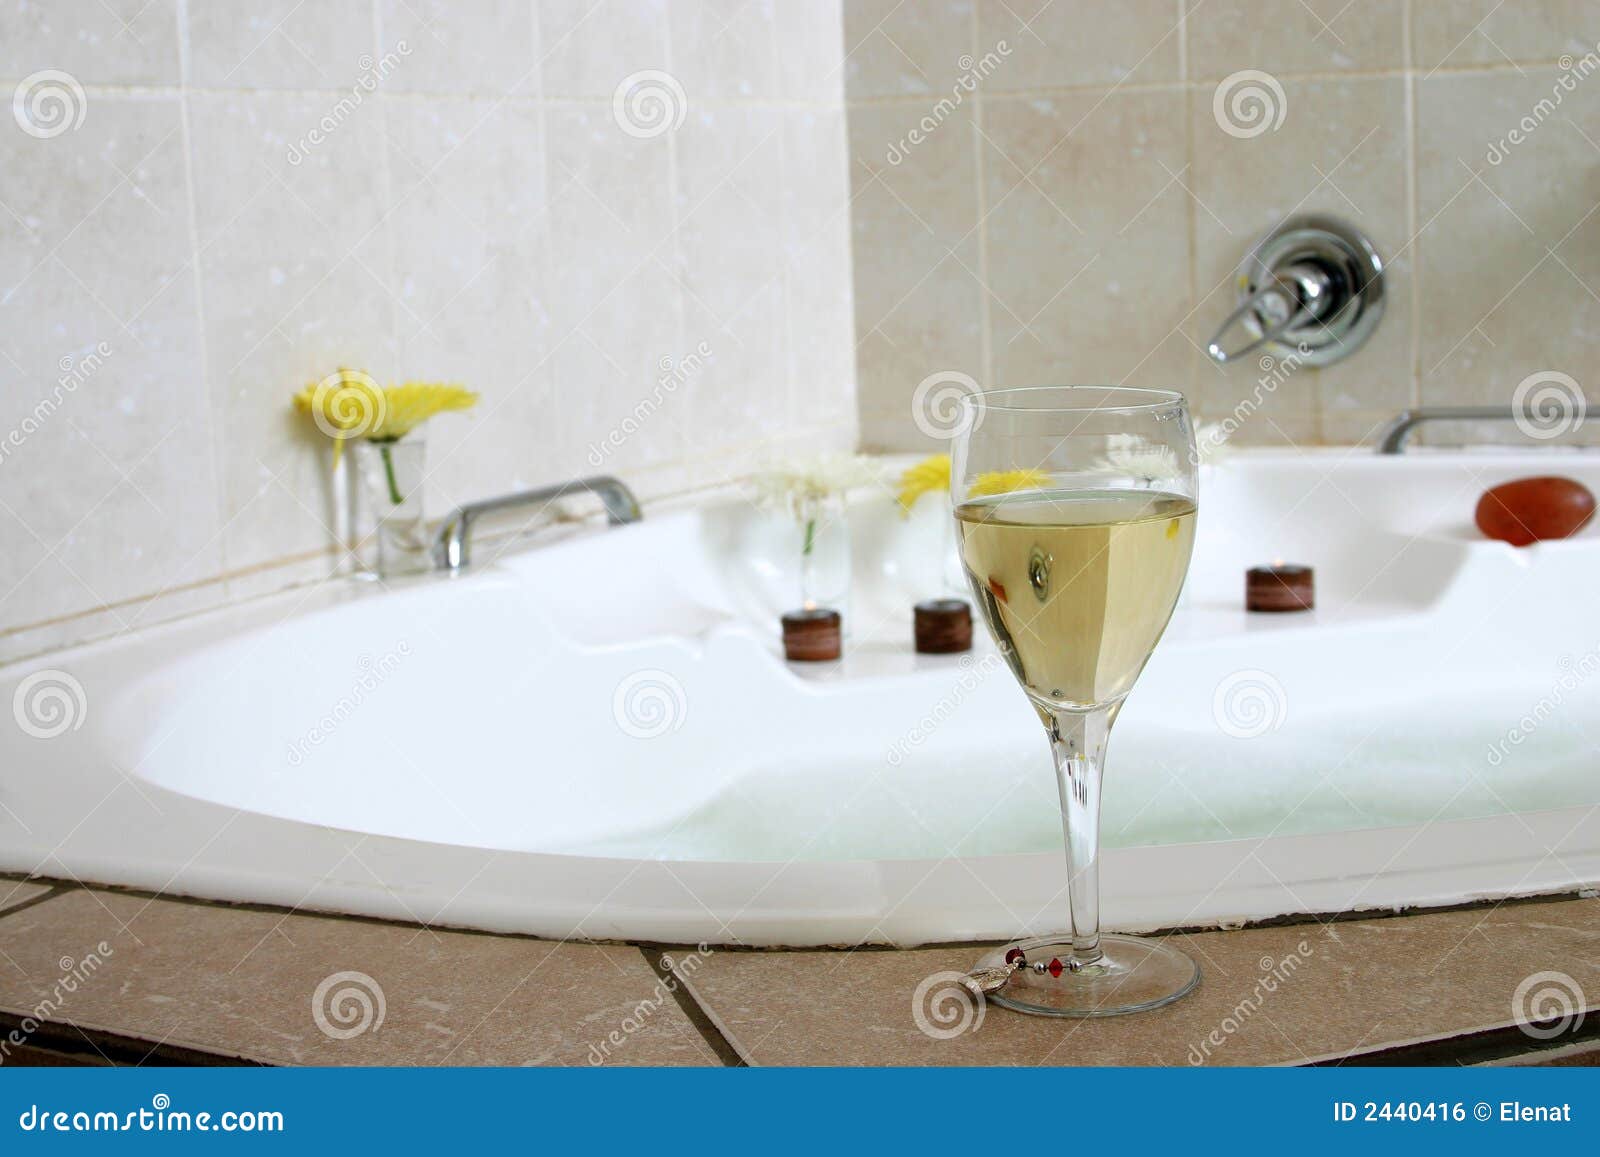 Glass Of Champagne On Bathtub Picture Image 2440416